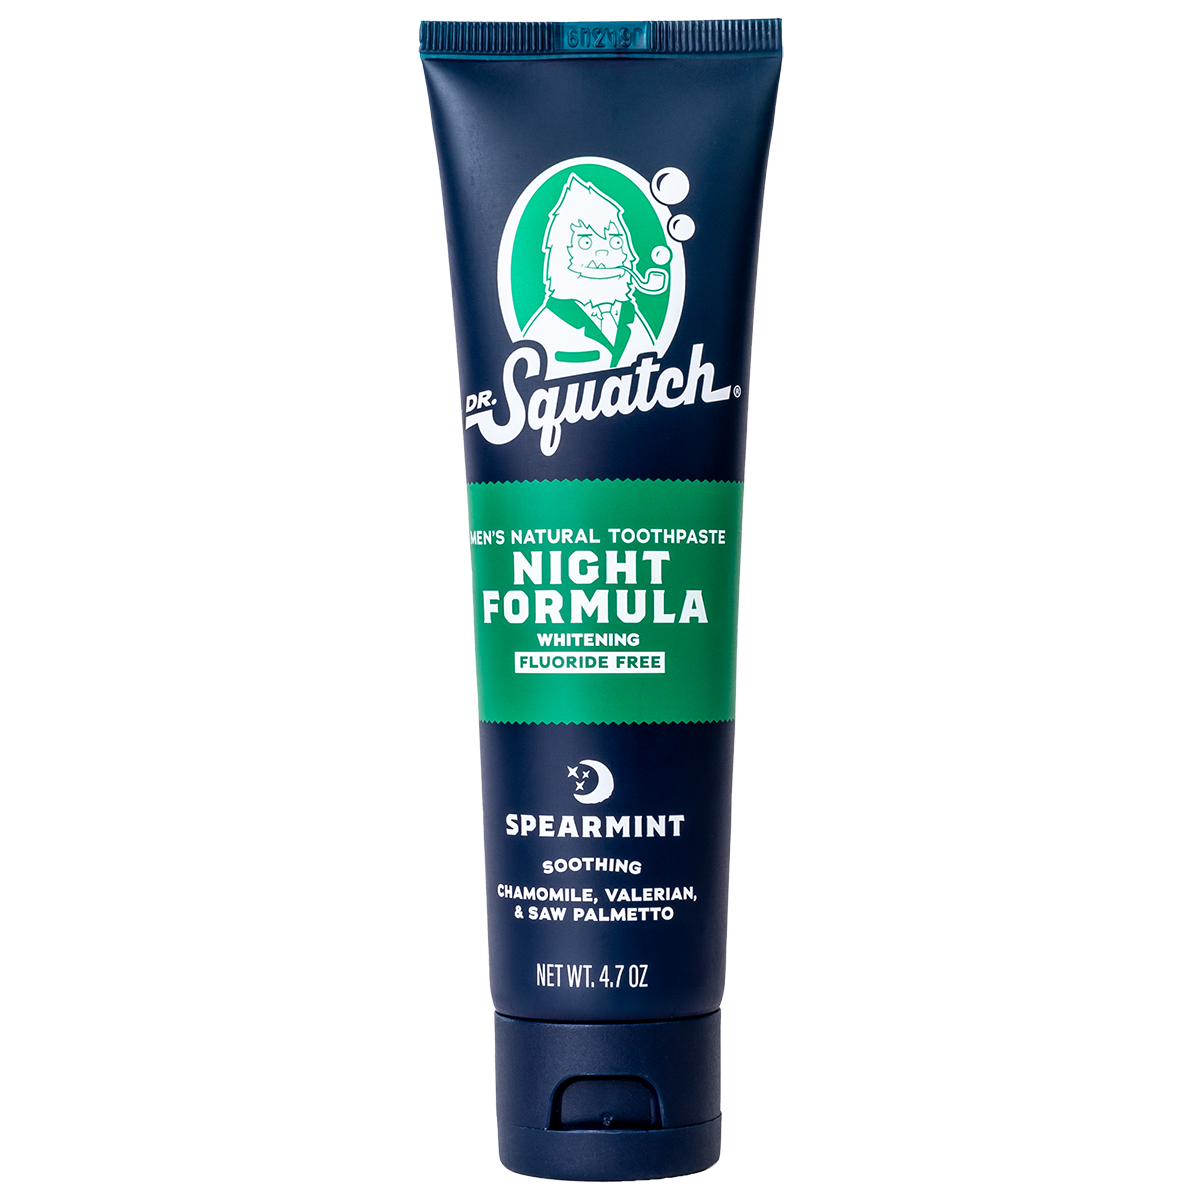  Dr. Squatch Teeth Whitening Toothpaste Kit - Day and